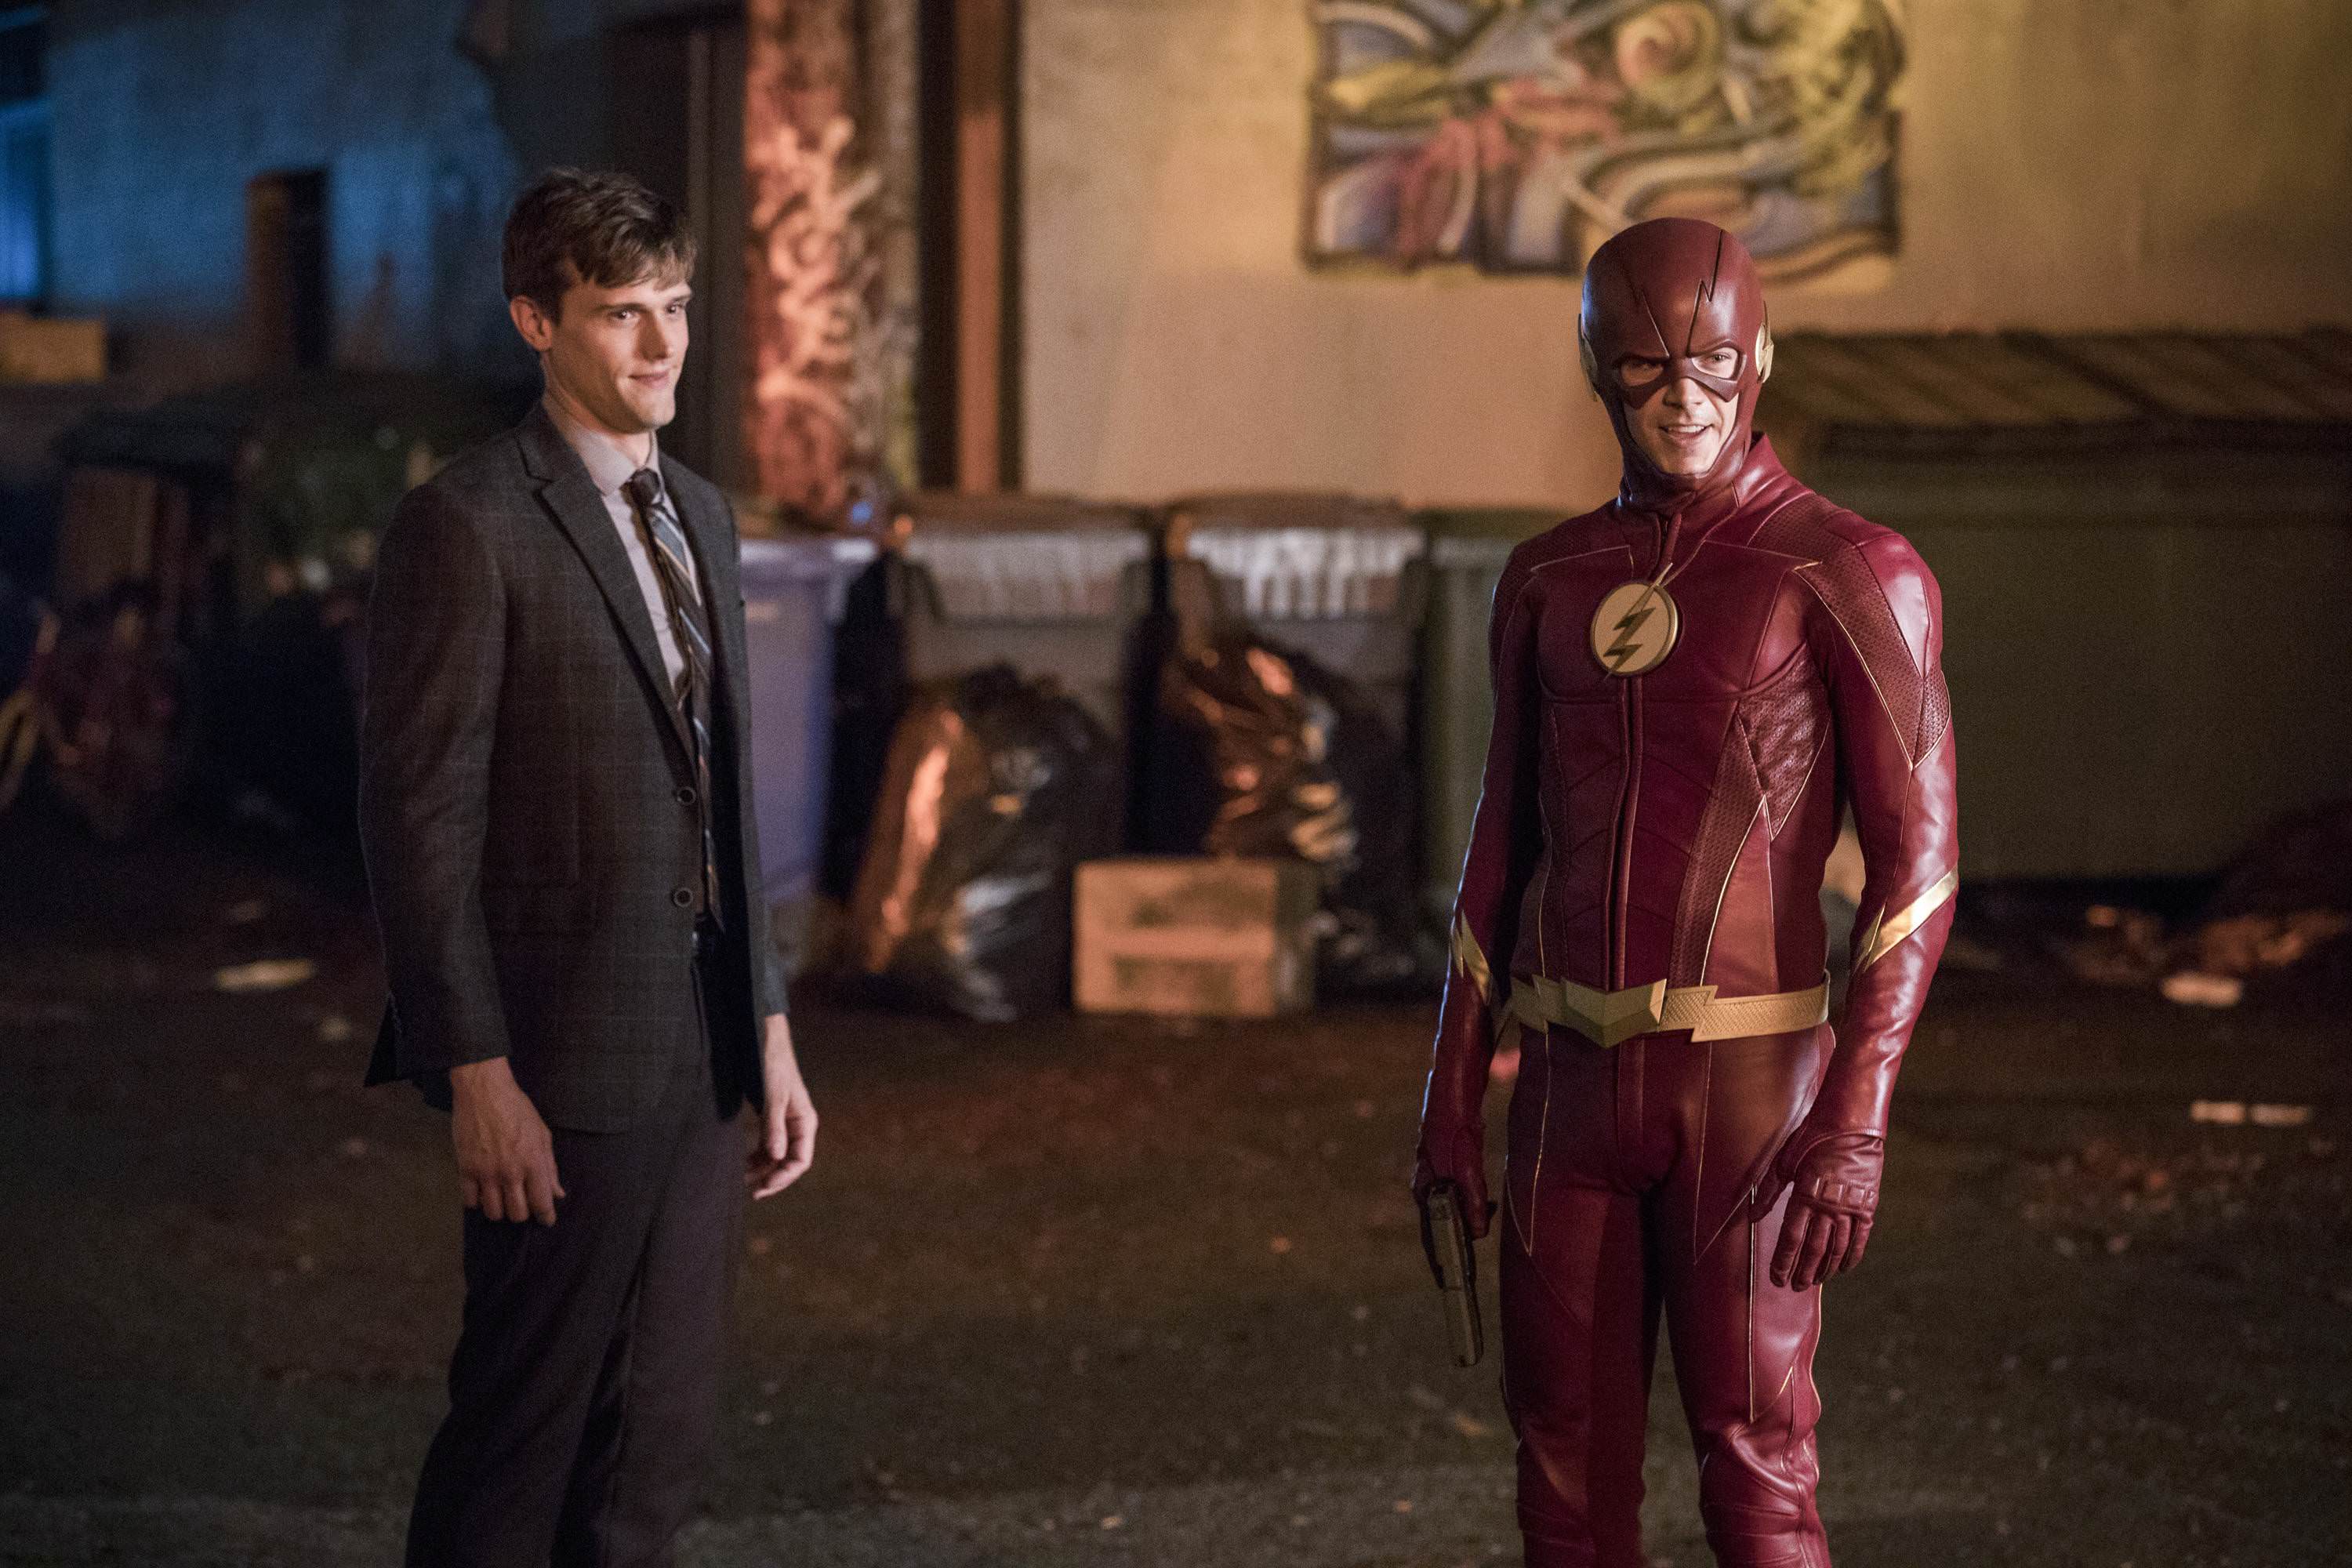 The Flash S4x4 “Elongated Nights Journey Into Night” Review (Spoilers)